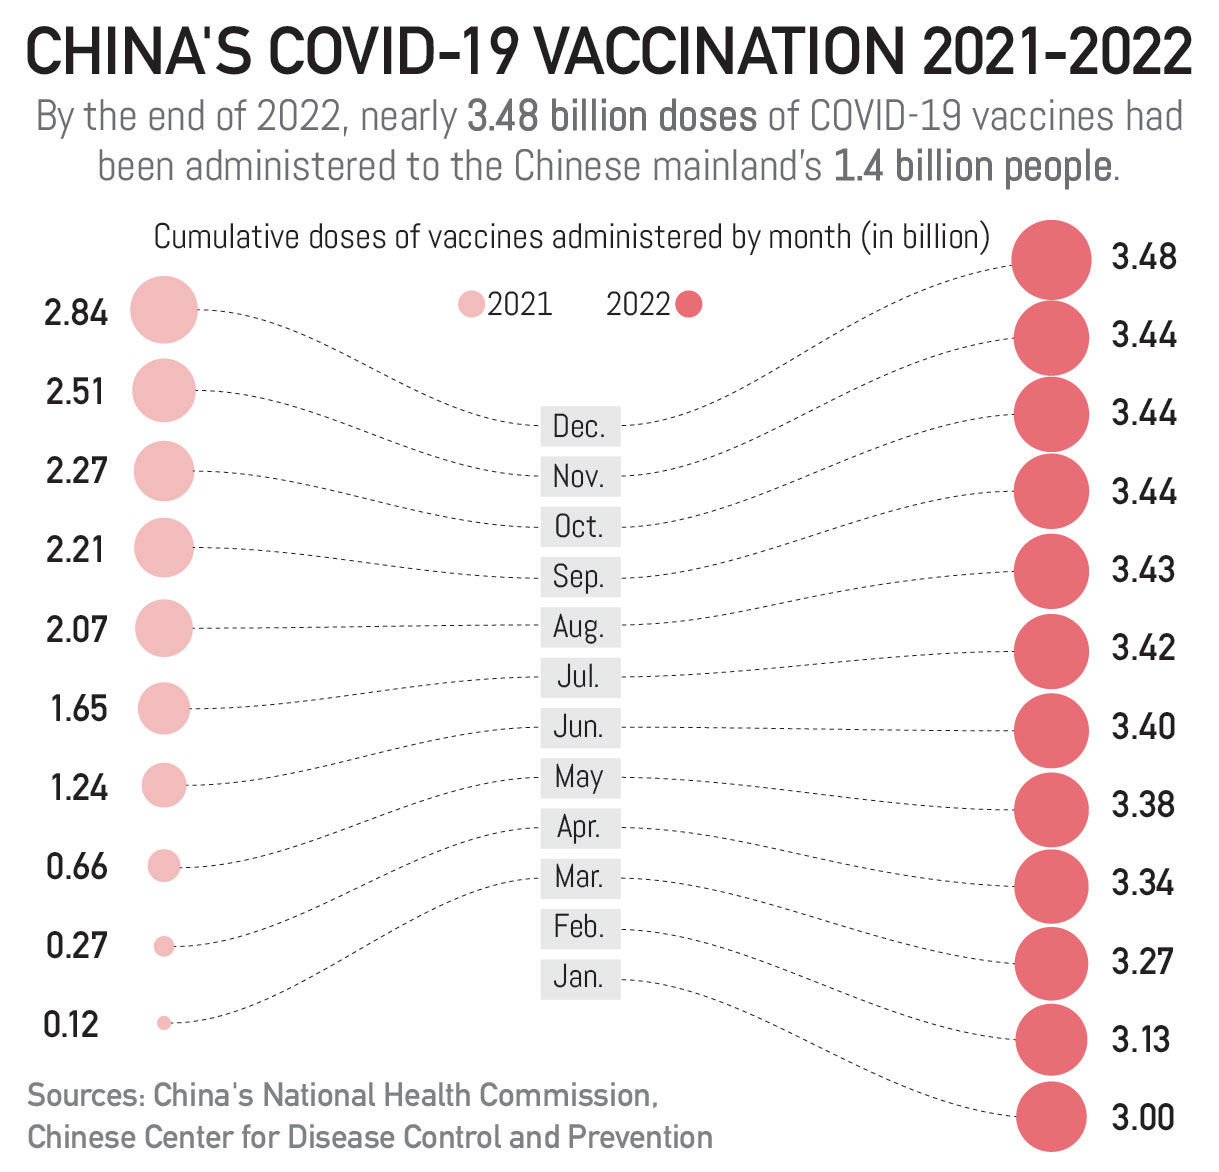 China's COVID-19 fight in numbers: Vaccinations in 2021-2022